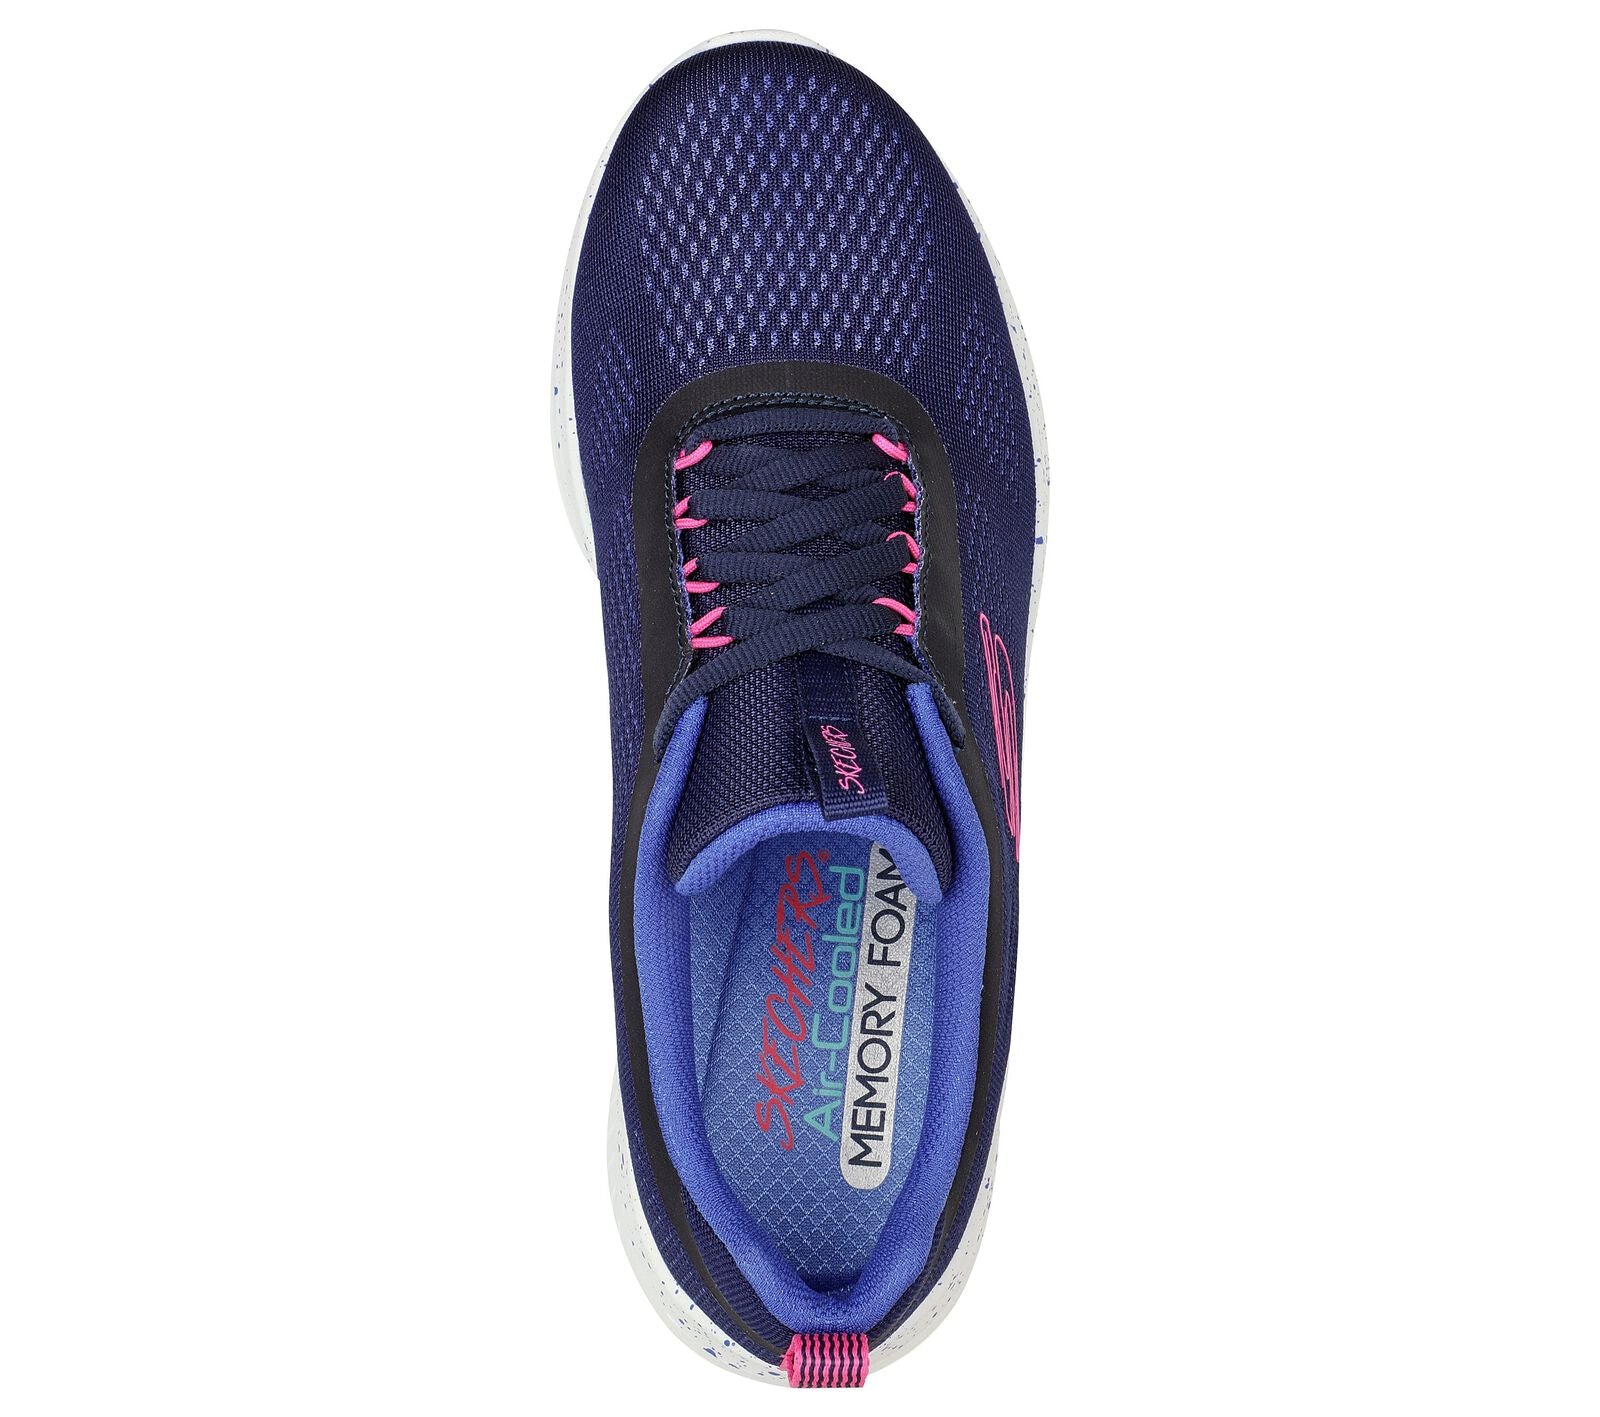 Skechers 149851 Ultra Flex 3.0 New Horizons Ladies Navy And Pink Textile Vegan Lace Up Trainers